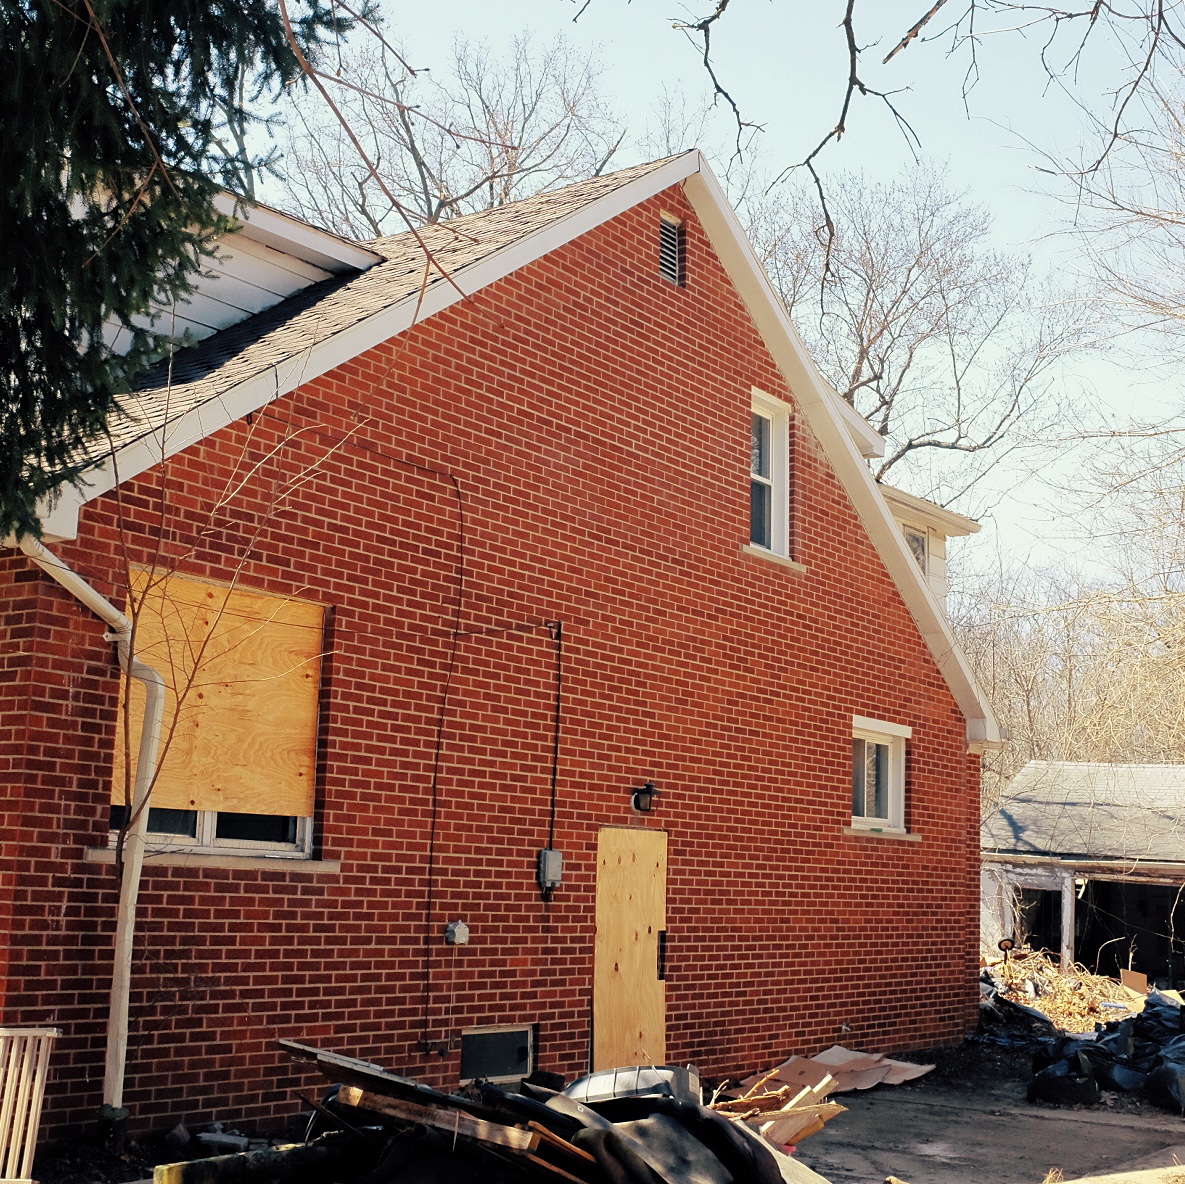 Photograph of right side of the house showing two open windows, one boarded up window, and a boarded up door. There is some garbage in the driveway in piles.